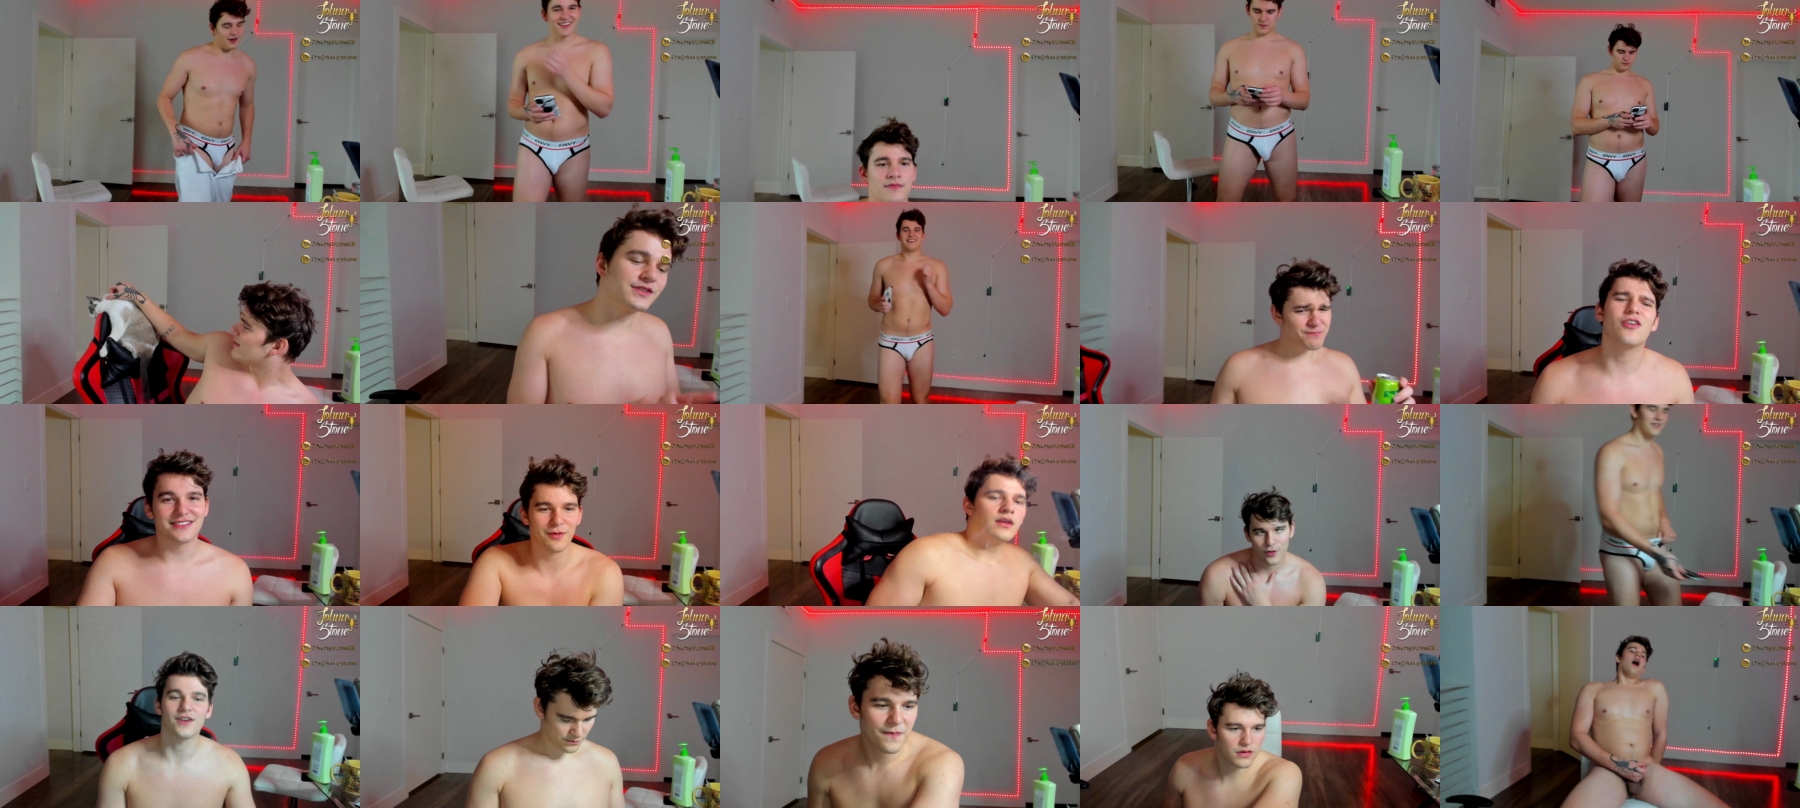 Thejohnnystone  24-07-2021 video naked